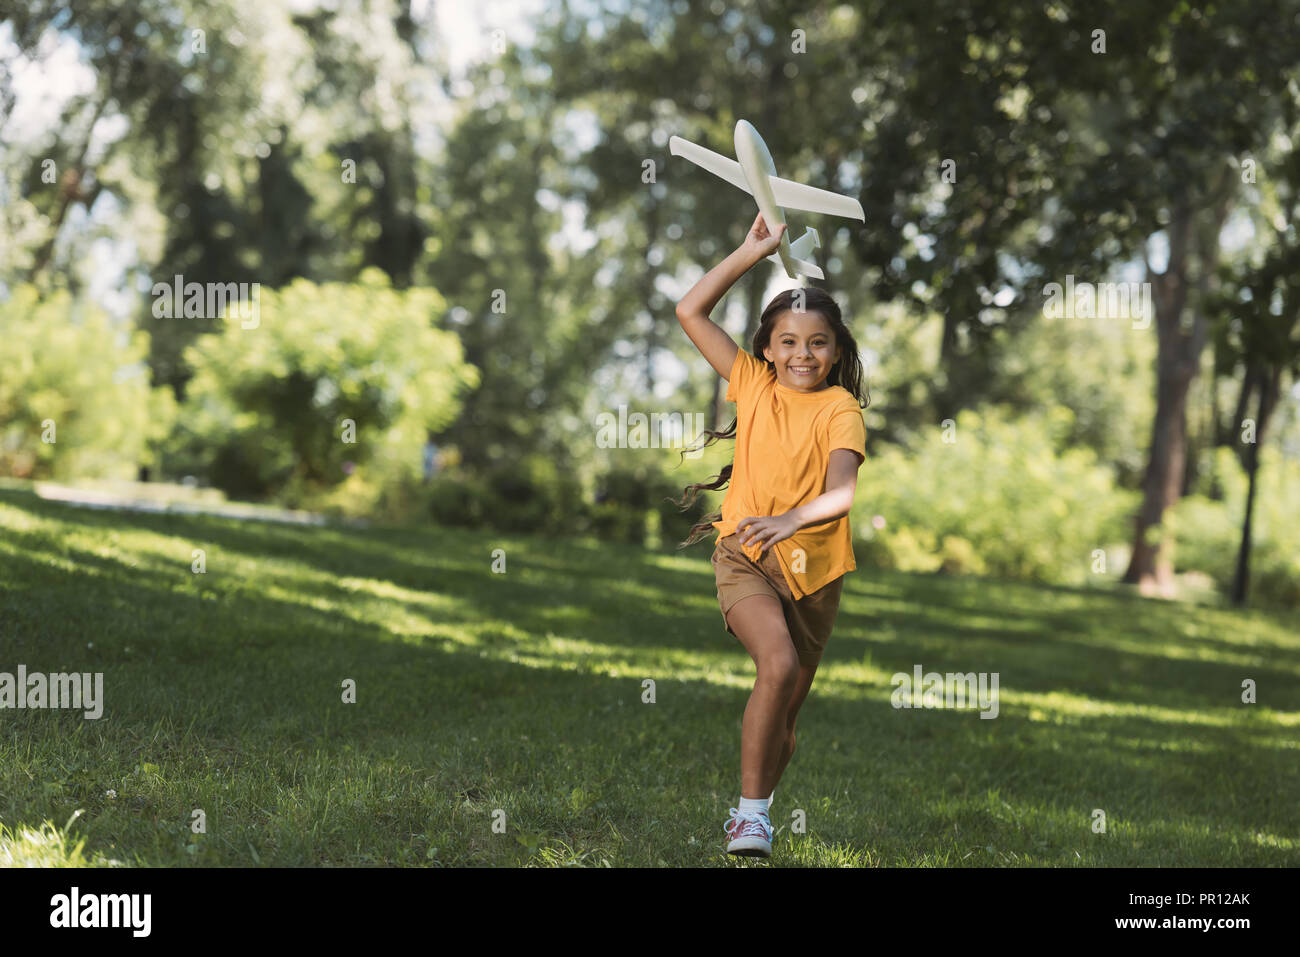 cute happy child throwing toy plane in park Stock Photo